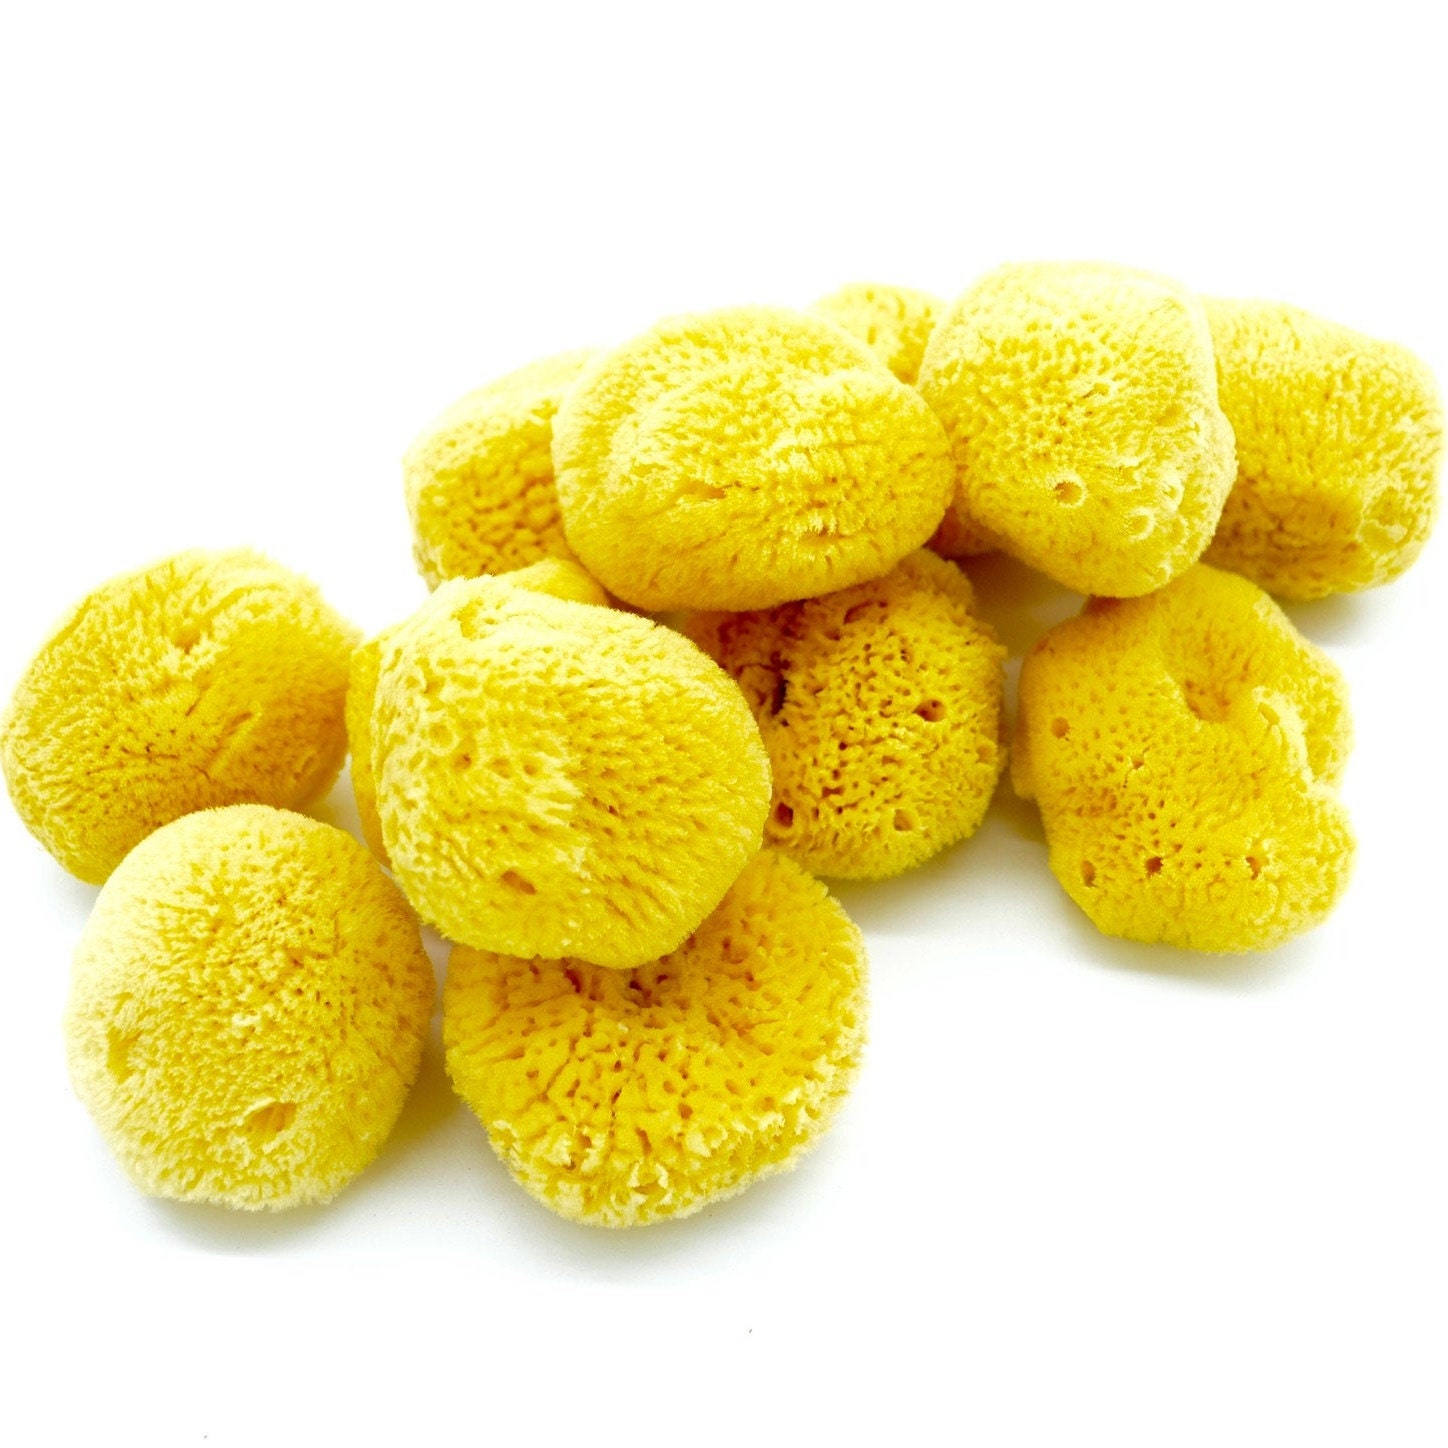 Buy Caribbean silk natural sponges for the face